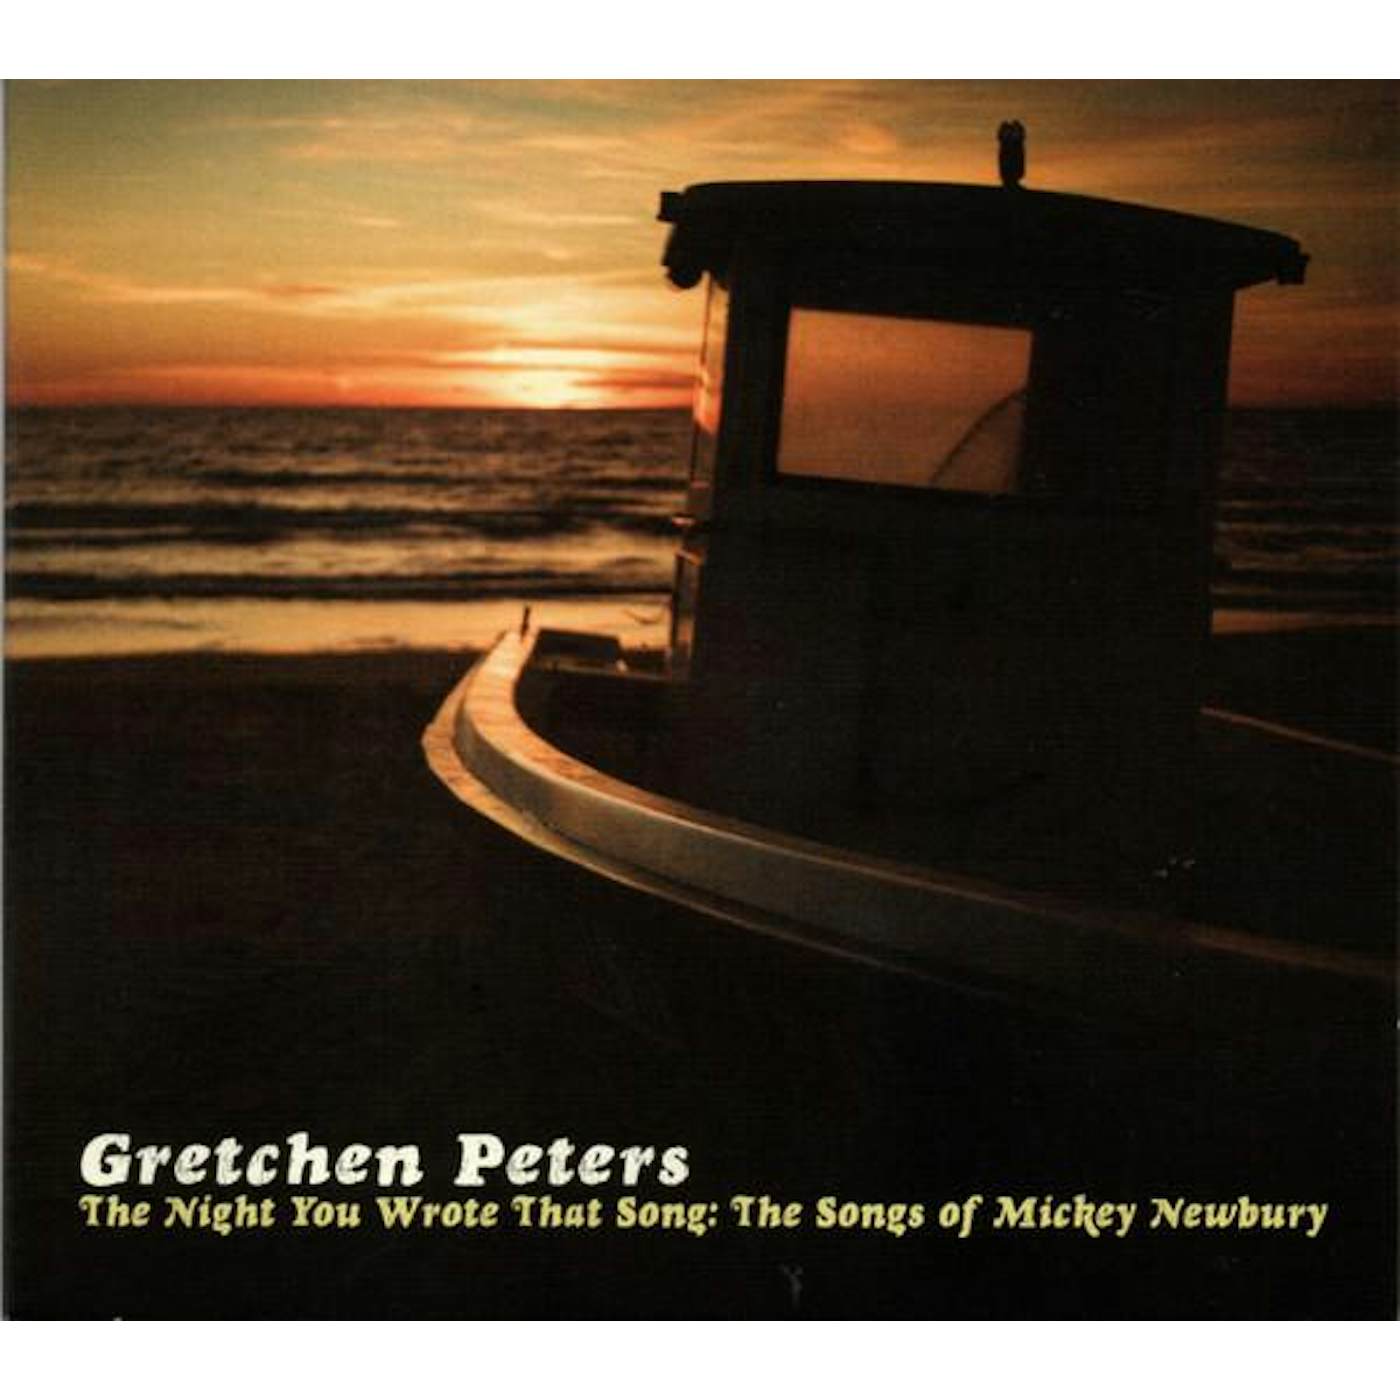 Gretchen Peters NIGHT YOU WROTE THAT SONG: THE SONGS OF MICKEY NEWBURY CD